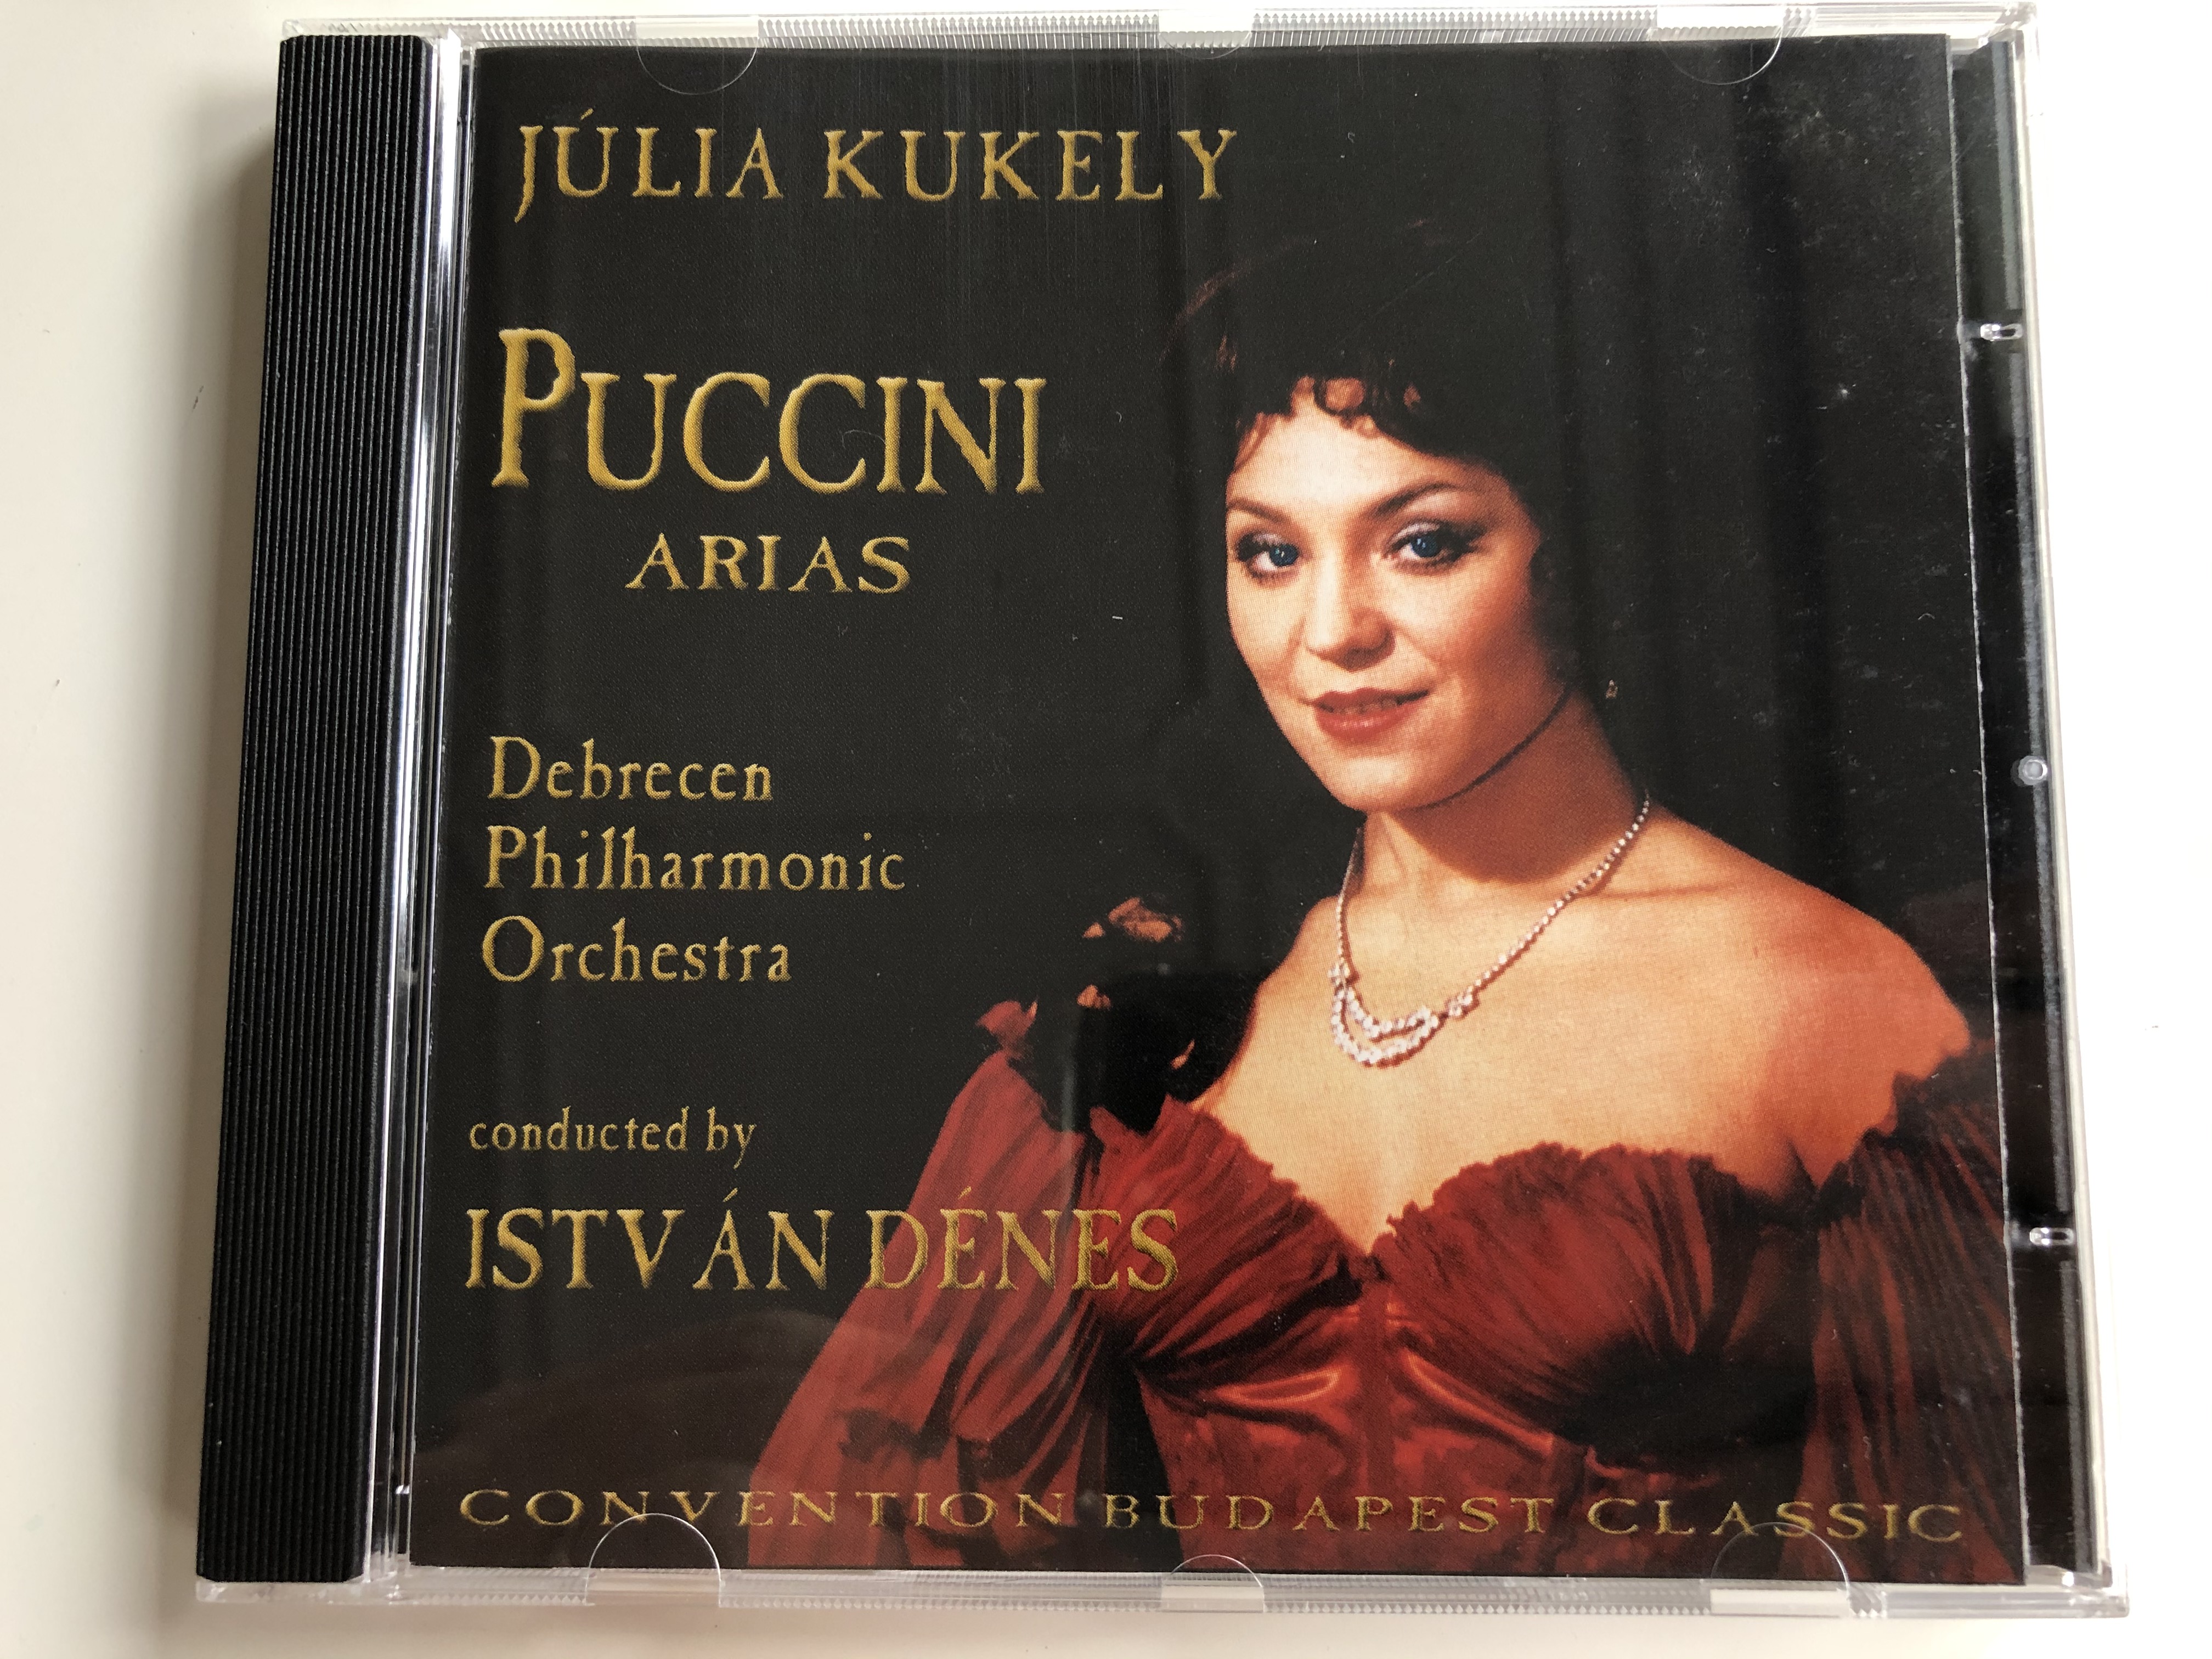 julia-kukely-puccini-arias-debrecen-philharmonic-orchestra-conducted-by-istvan-denes-convention-budapest-classic-audio-cd-1999-cbp-004-1-.jpg